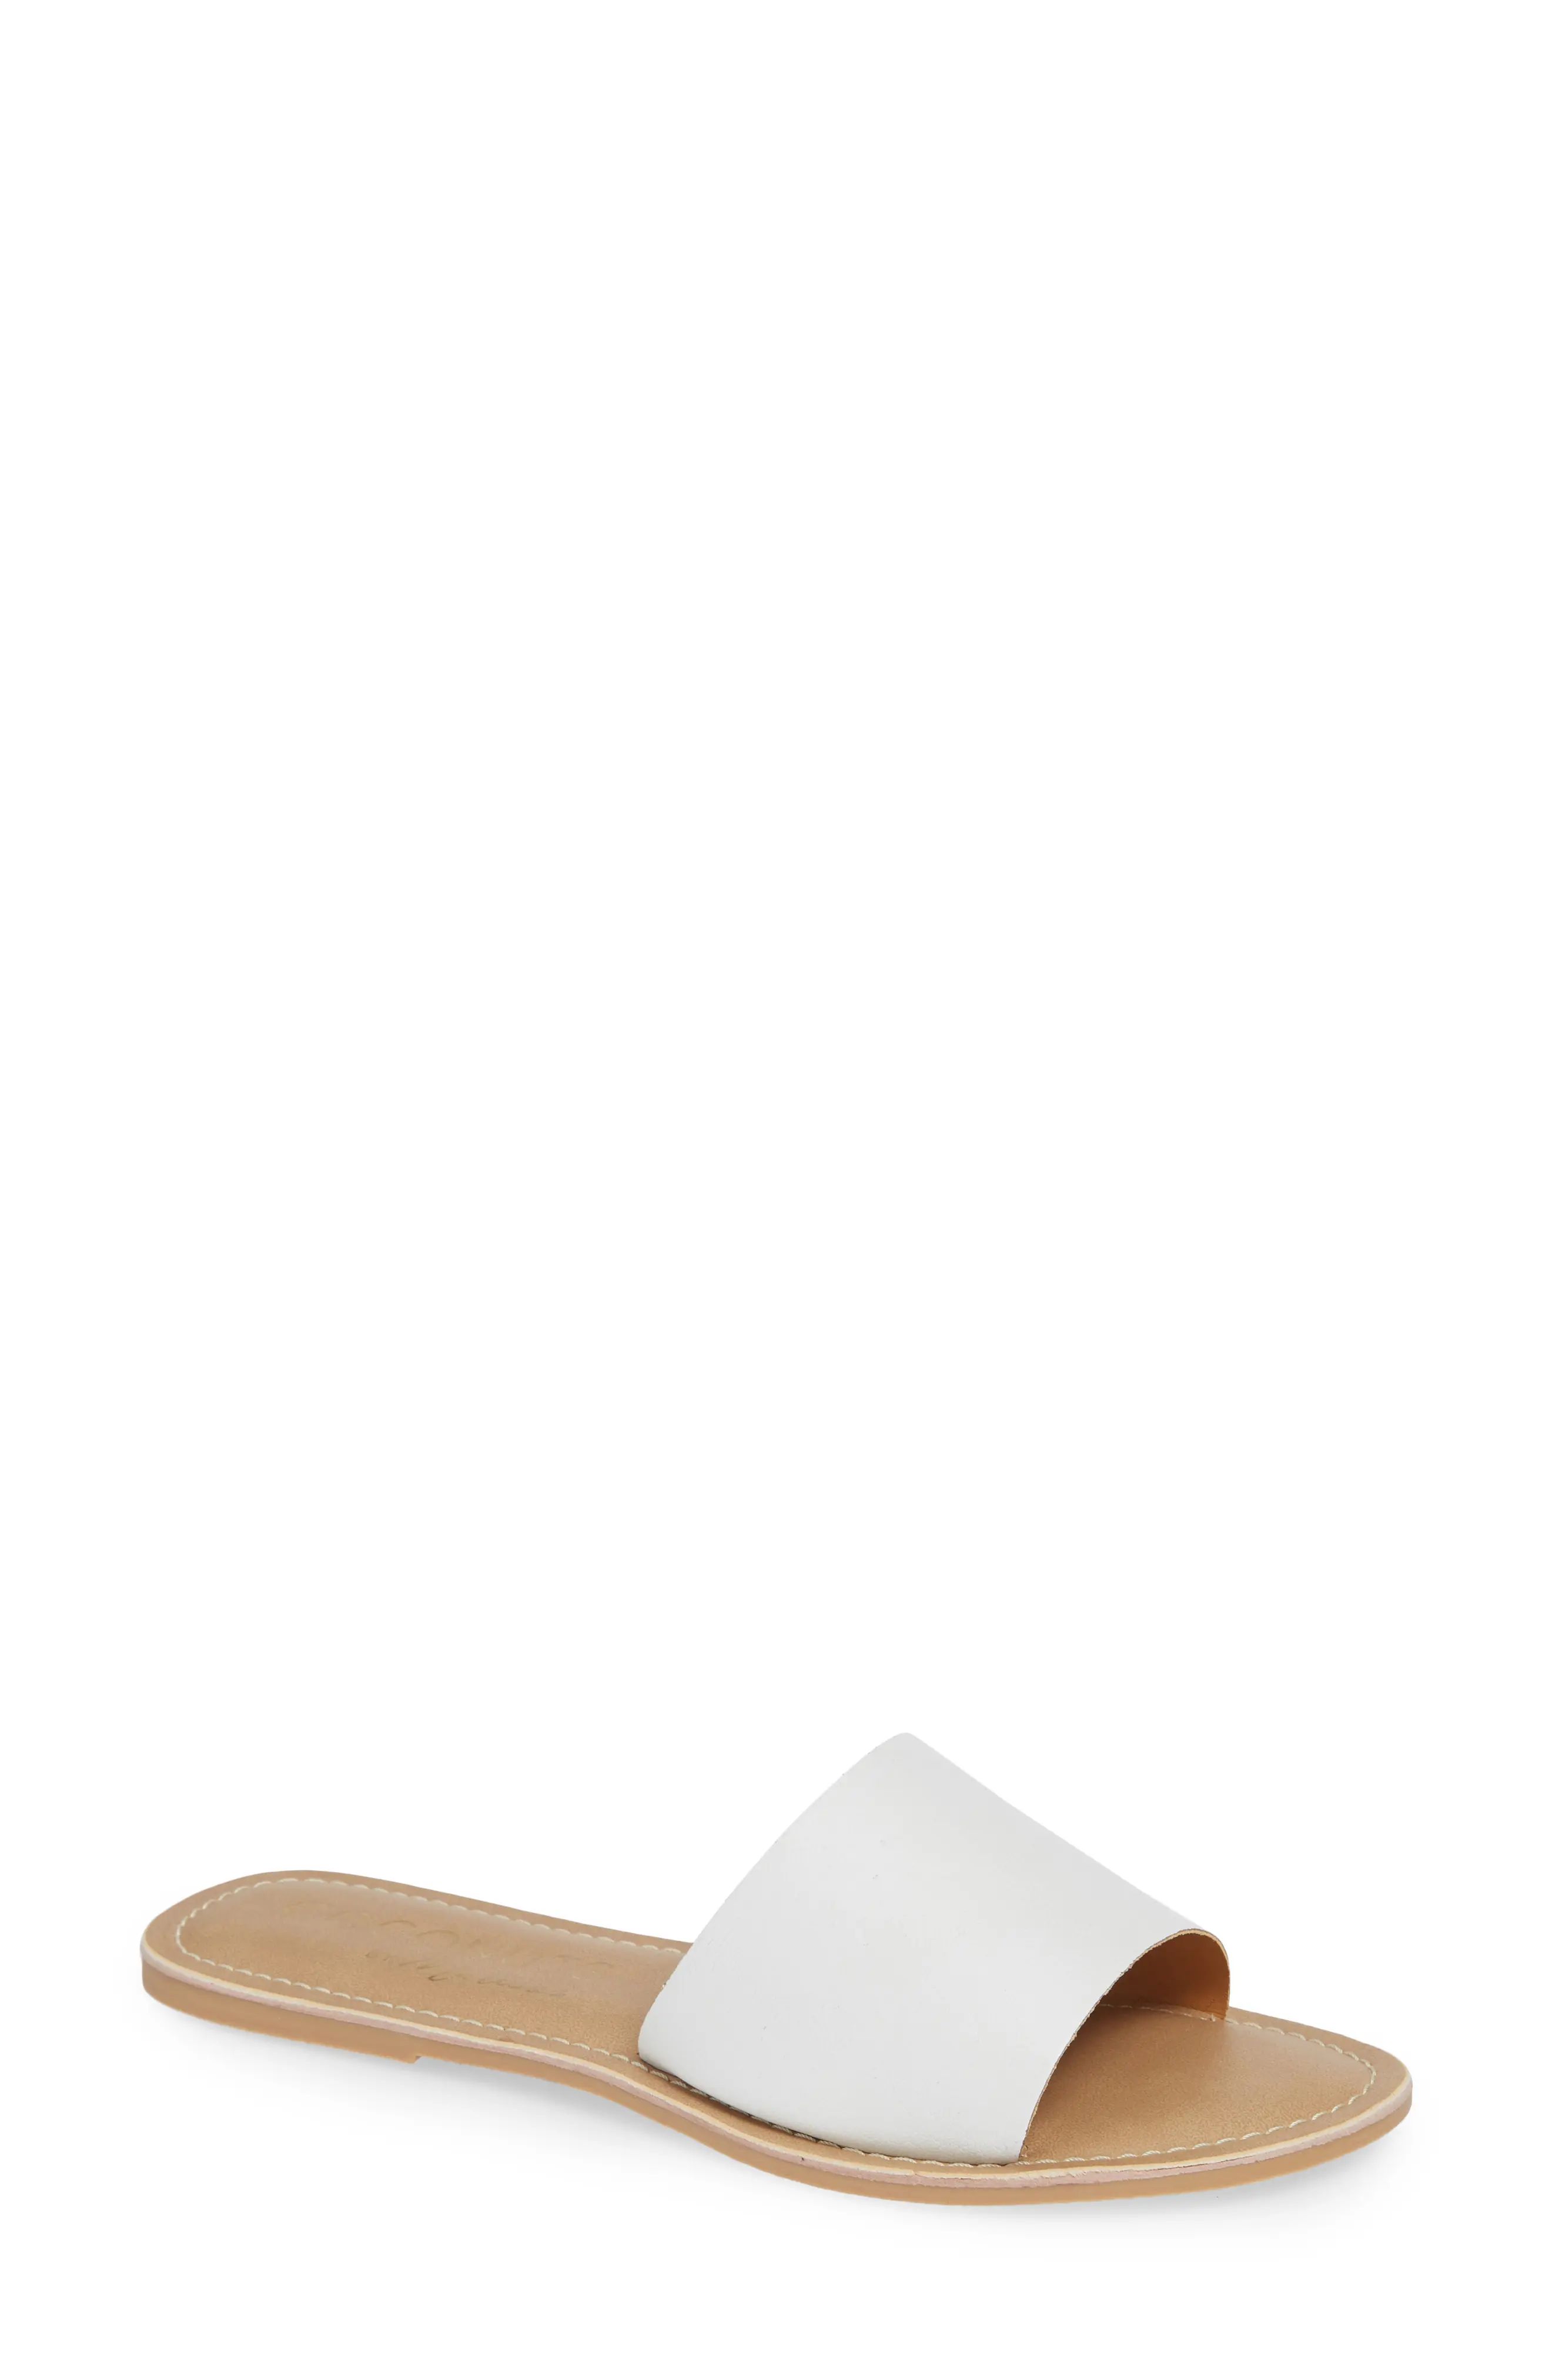 BEACH BY MATISSE Coconuts by Matisse Cabana Slide Sandal in White Leather at Nordstrom, Size 6 | Nordstrom